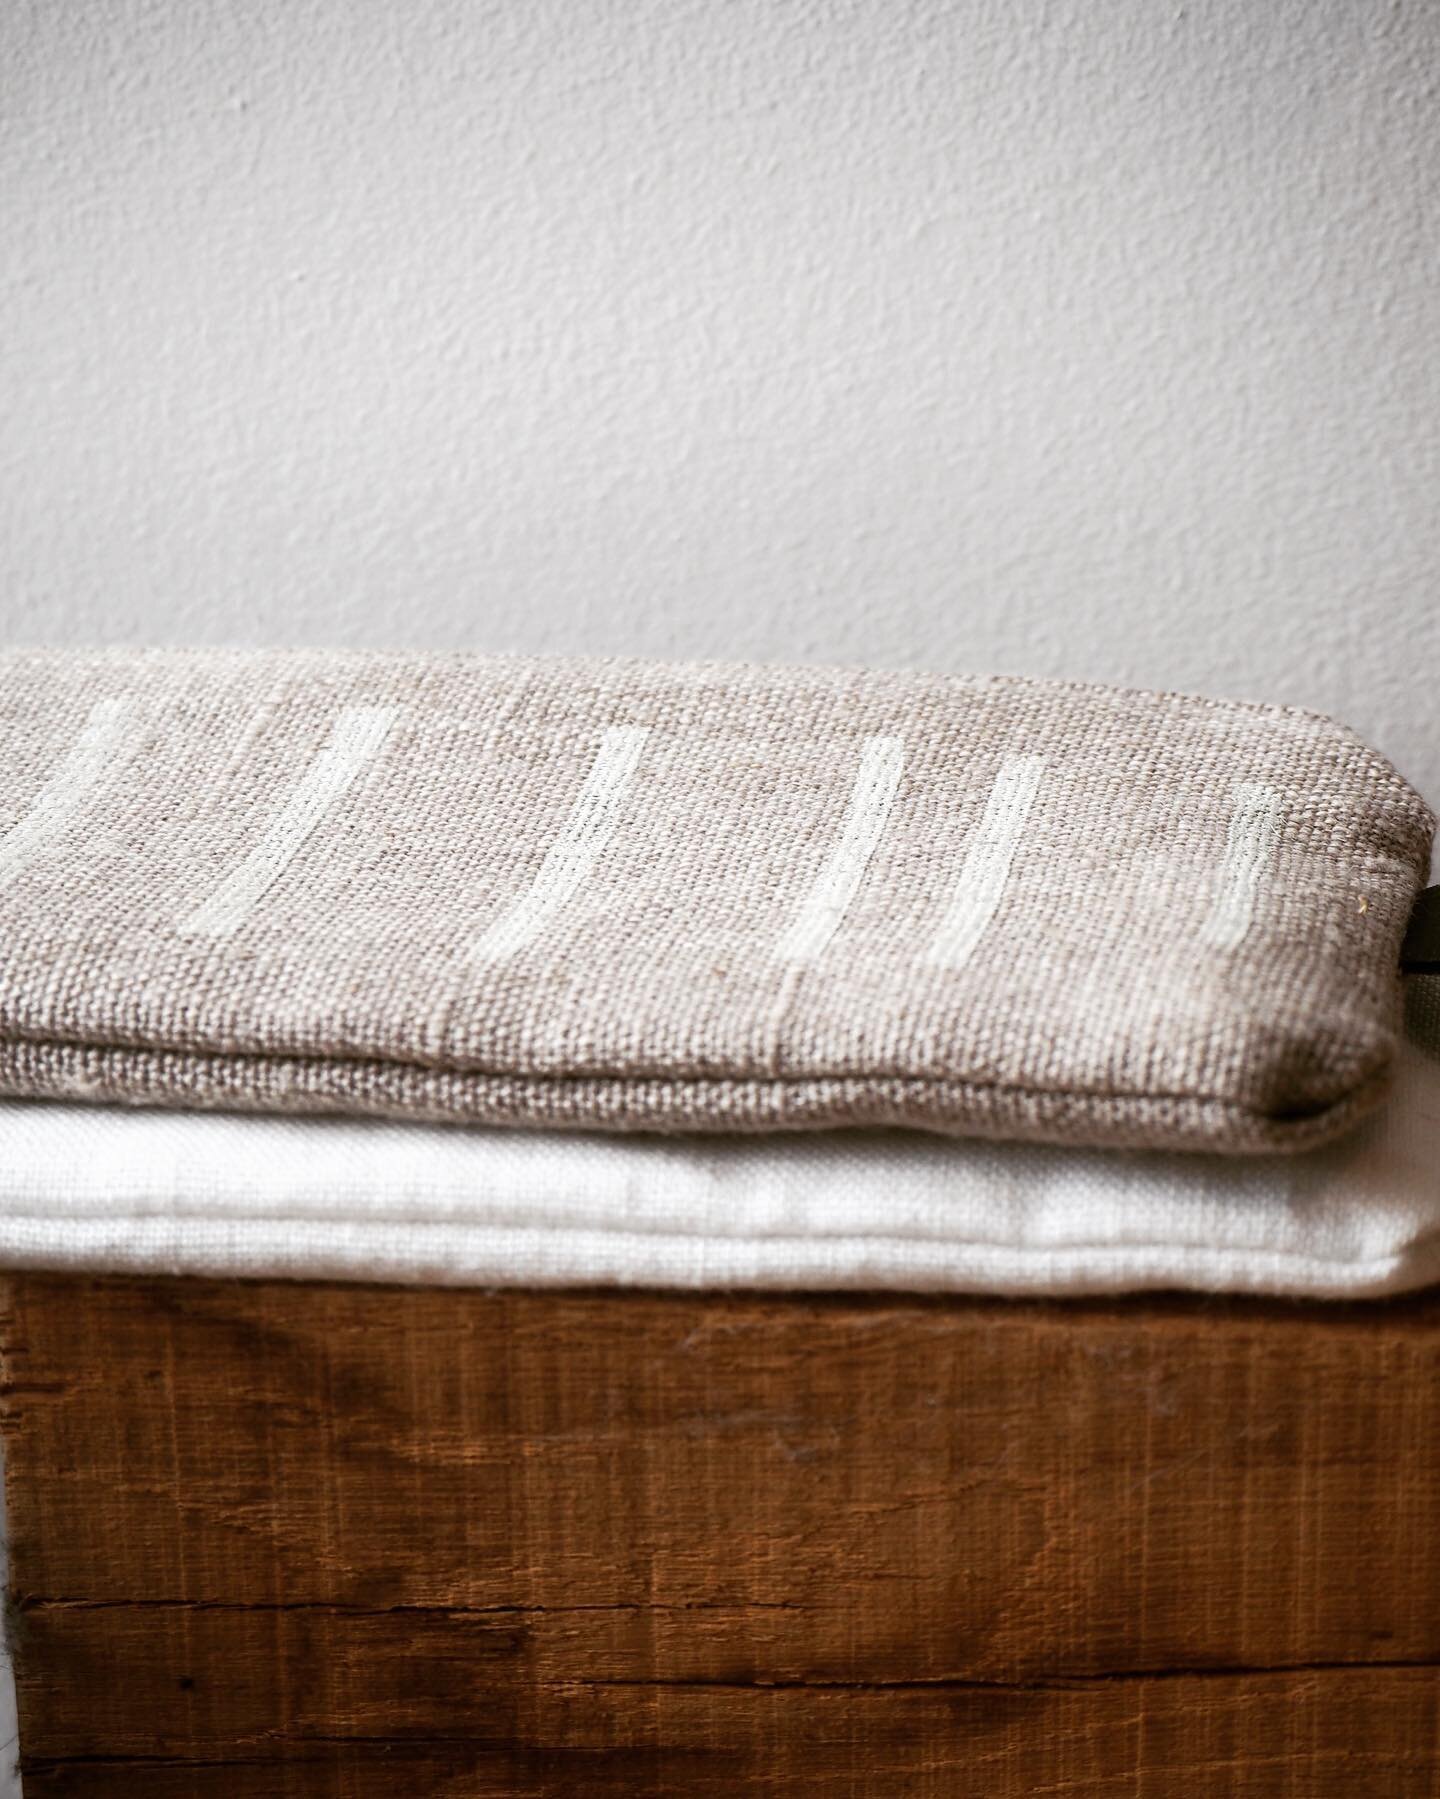 Our linen pencil case or small makeup case, perfect for carrying around all the little bits and bobs you may need during the day . . . 

makes a nice little gift too 🧡 

happy Friday x 
.
.
.
.
.
.
.
#pencilcase #makeupcase #makeupbag #storage #home